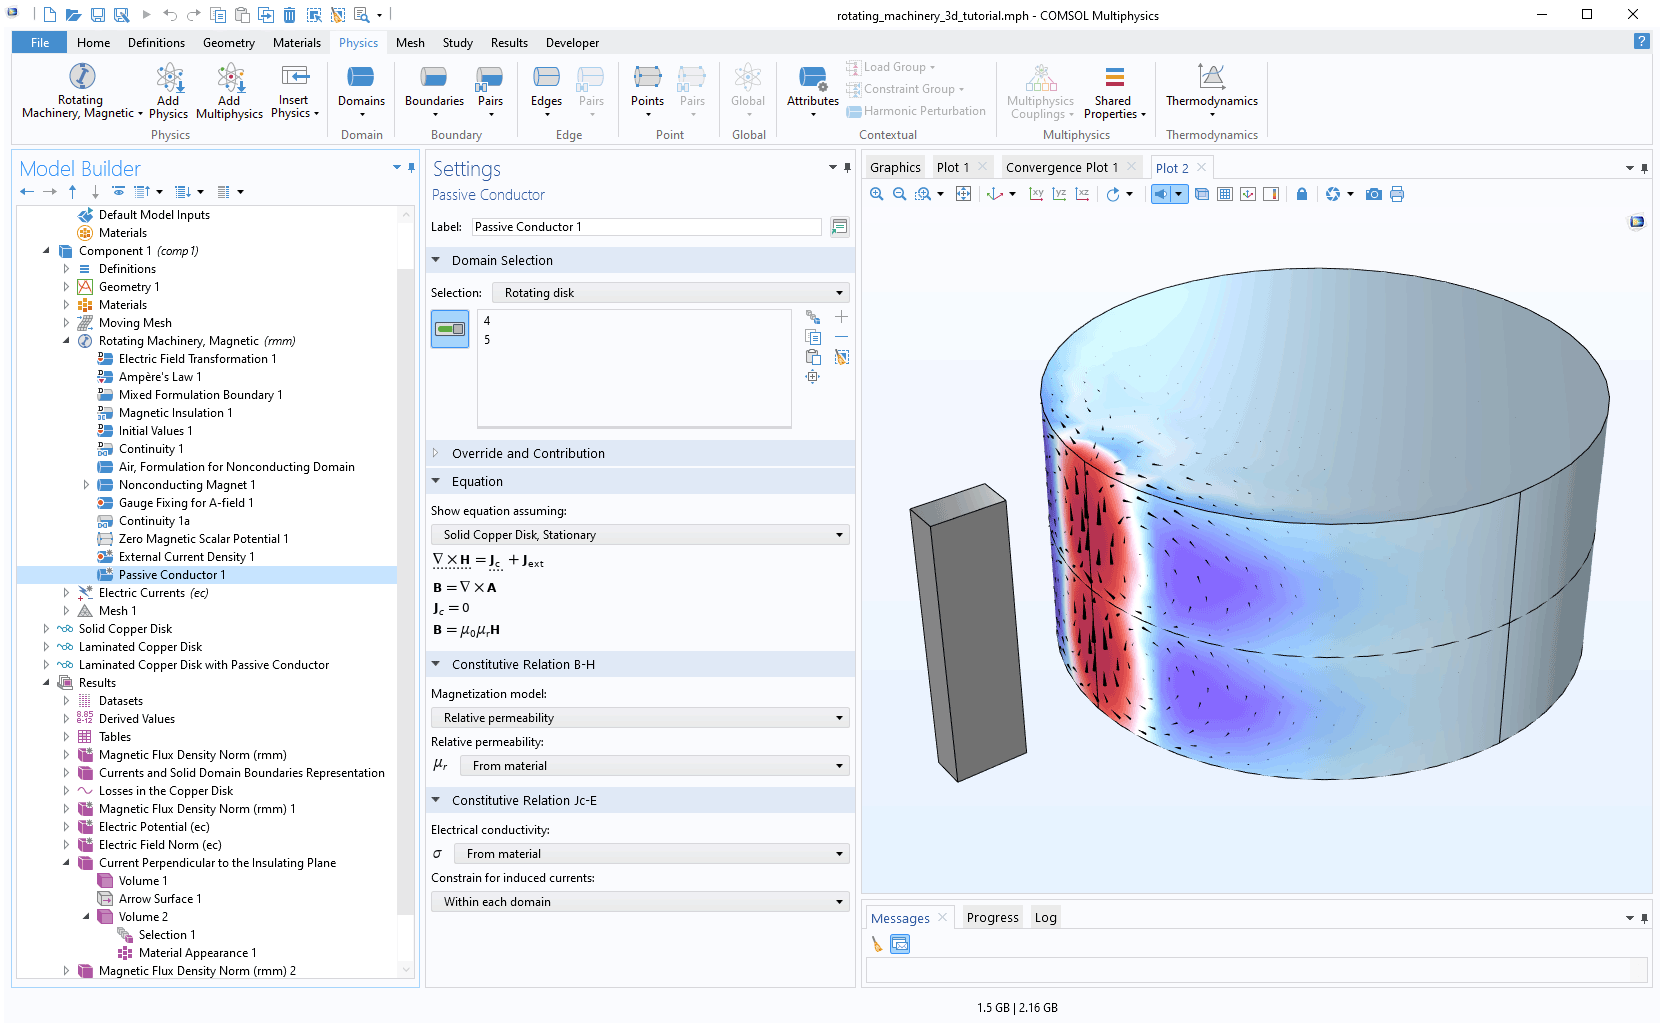 The COMSOL Multiphysics UI showing the Model Builder with the Passive Conductor node highlighted, the corresponding Setting window, and a 3D model in the Graphics window.